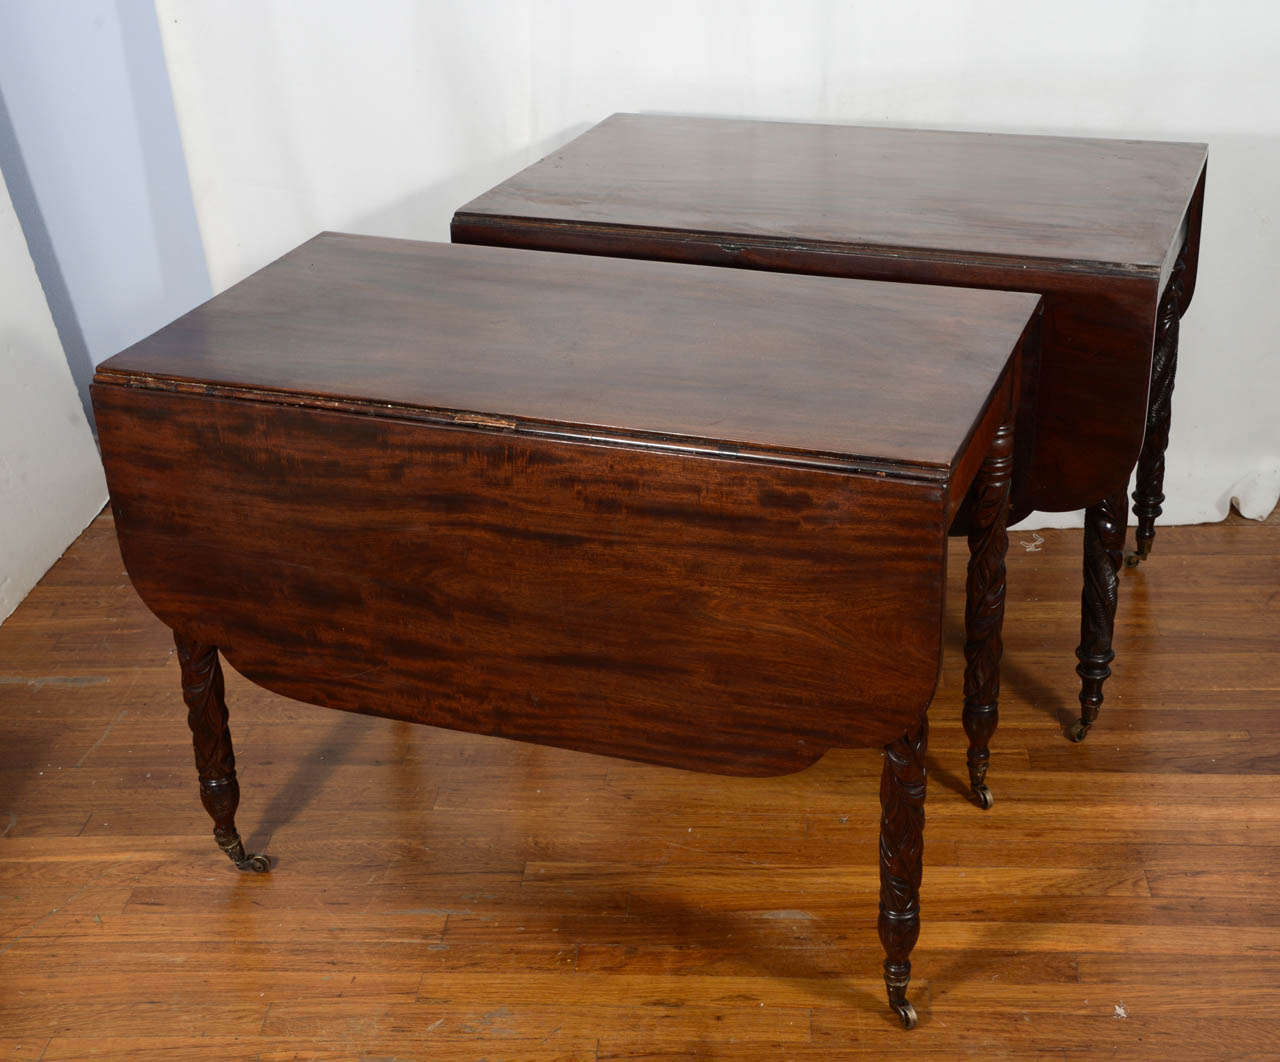 Federal period, Mahogany drop-leaf, tapered, hand-carved acanthus leaf designed legs with brass casters, beautifully finished dining tables. Matching tables however one is 22